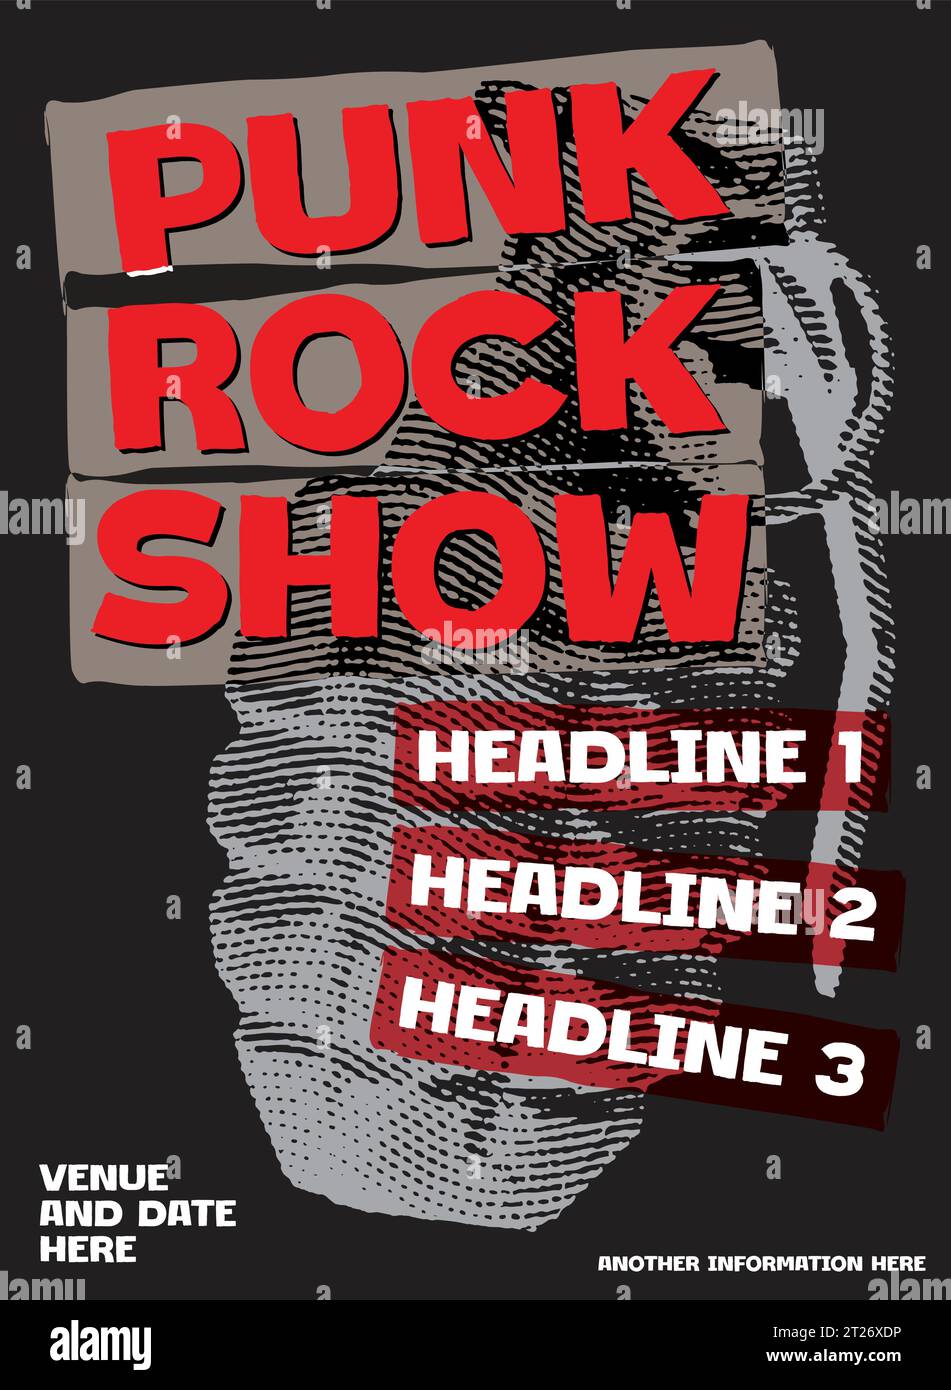 Punk rock show, punk music festival poster, gigs show posters template design, raw and hype fest, music concert vector Stock Vector